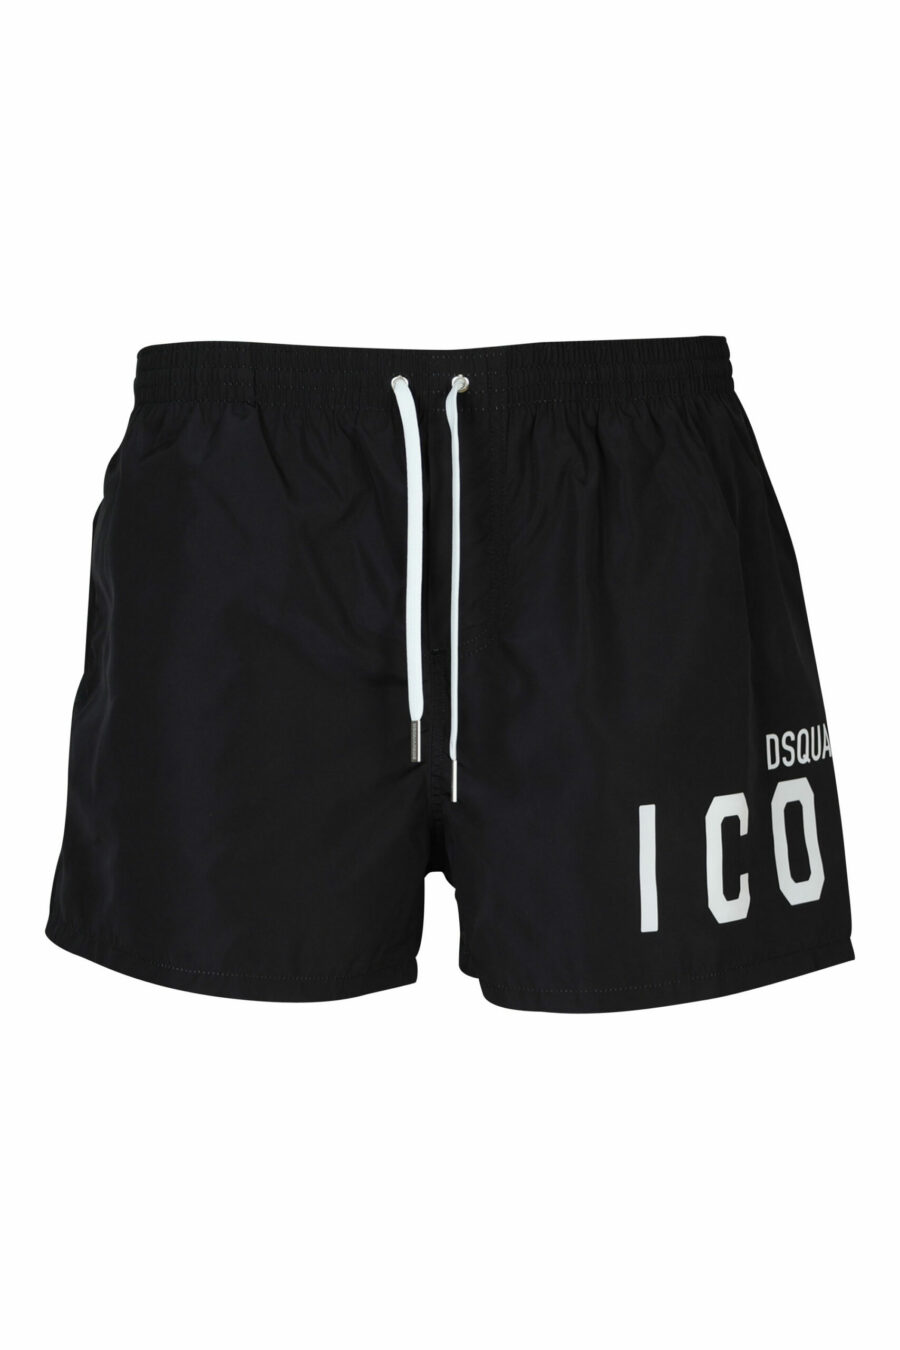 Black swimming costume with white "icon" logo - 8032674779908 scaled